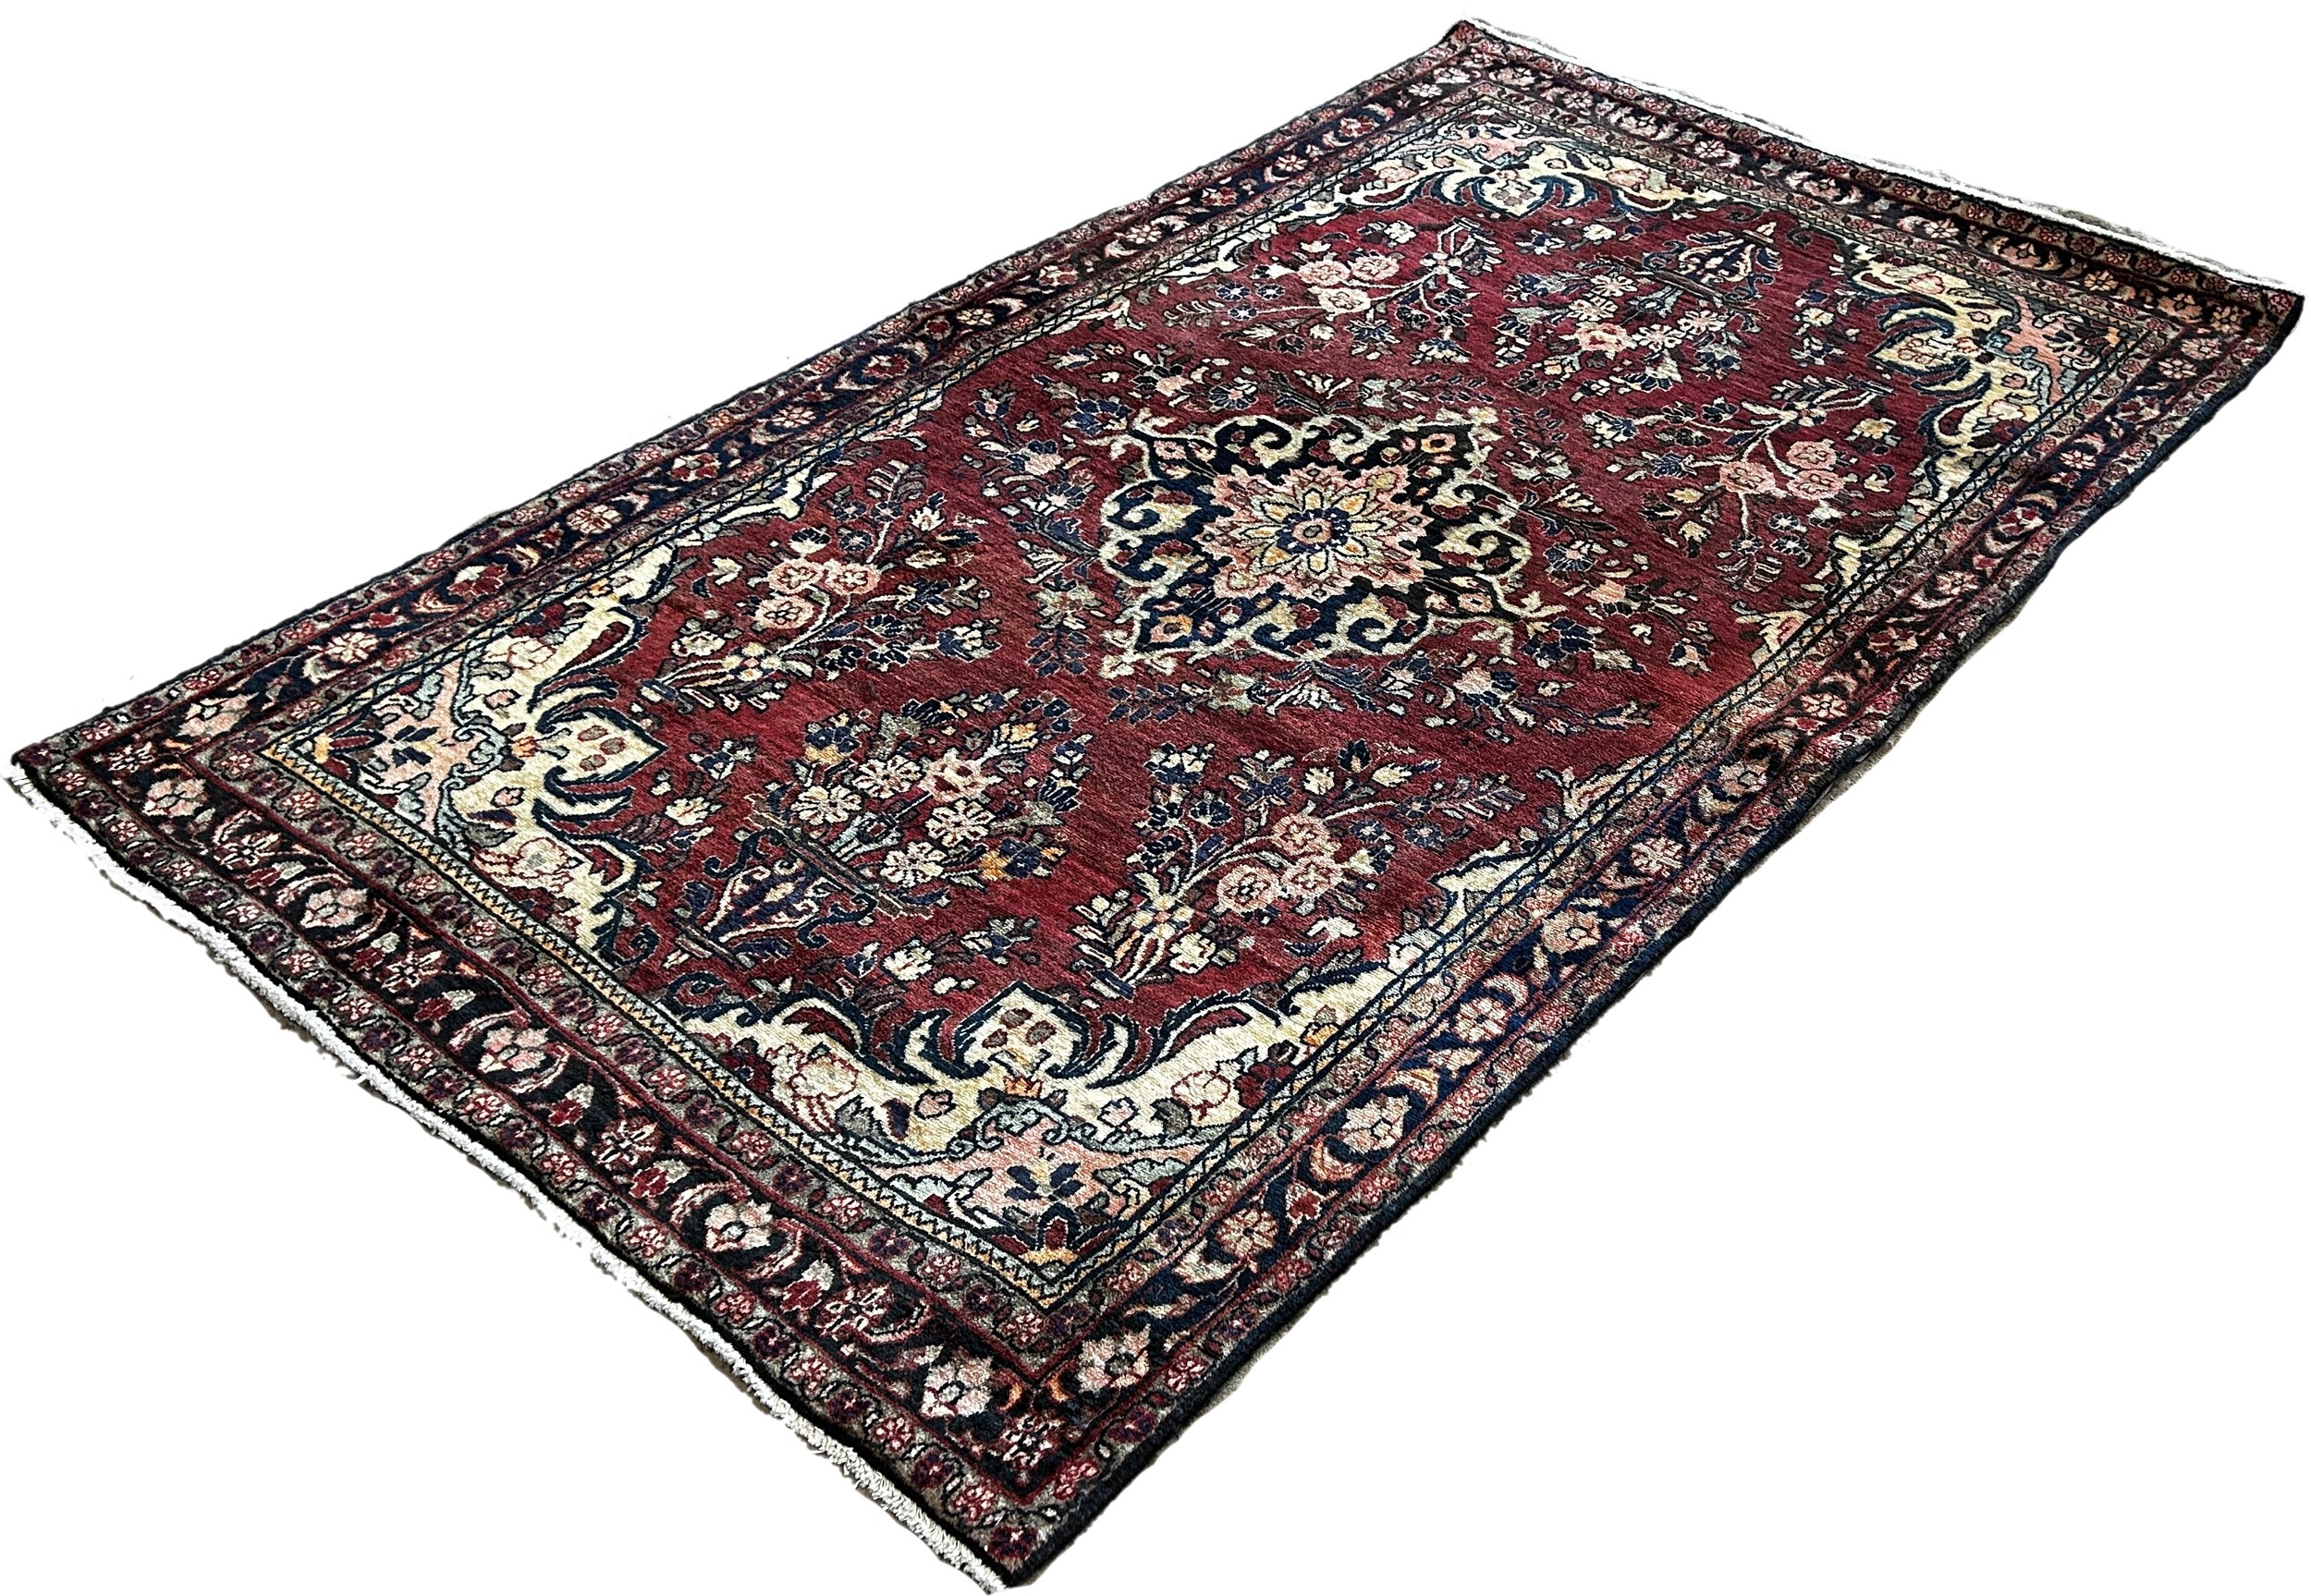 North West Persian Sarouk Mahal Rug, with a central floral medallion with clusters of flowers on a